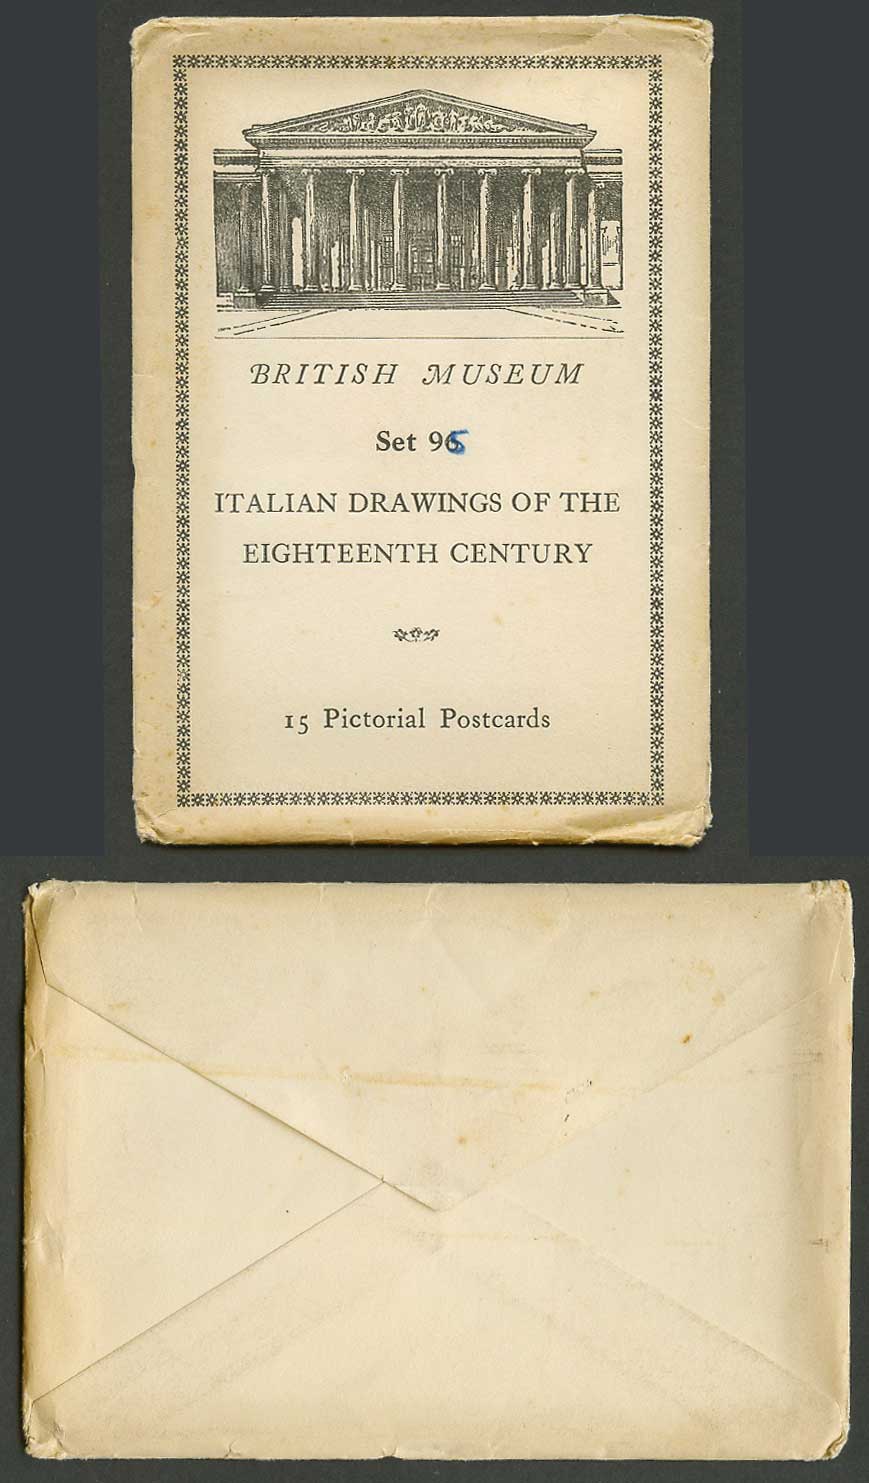 Empty Wallet for Old Postcards, Italian Drawings of 18th Century, British Museum